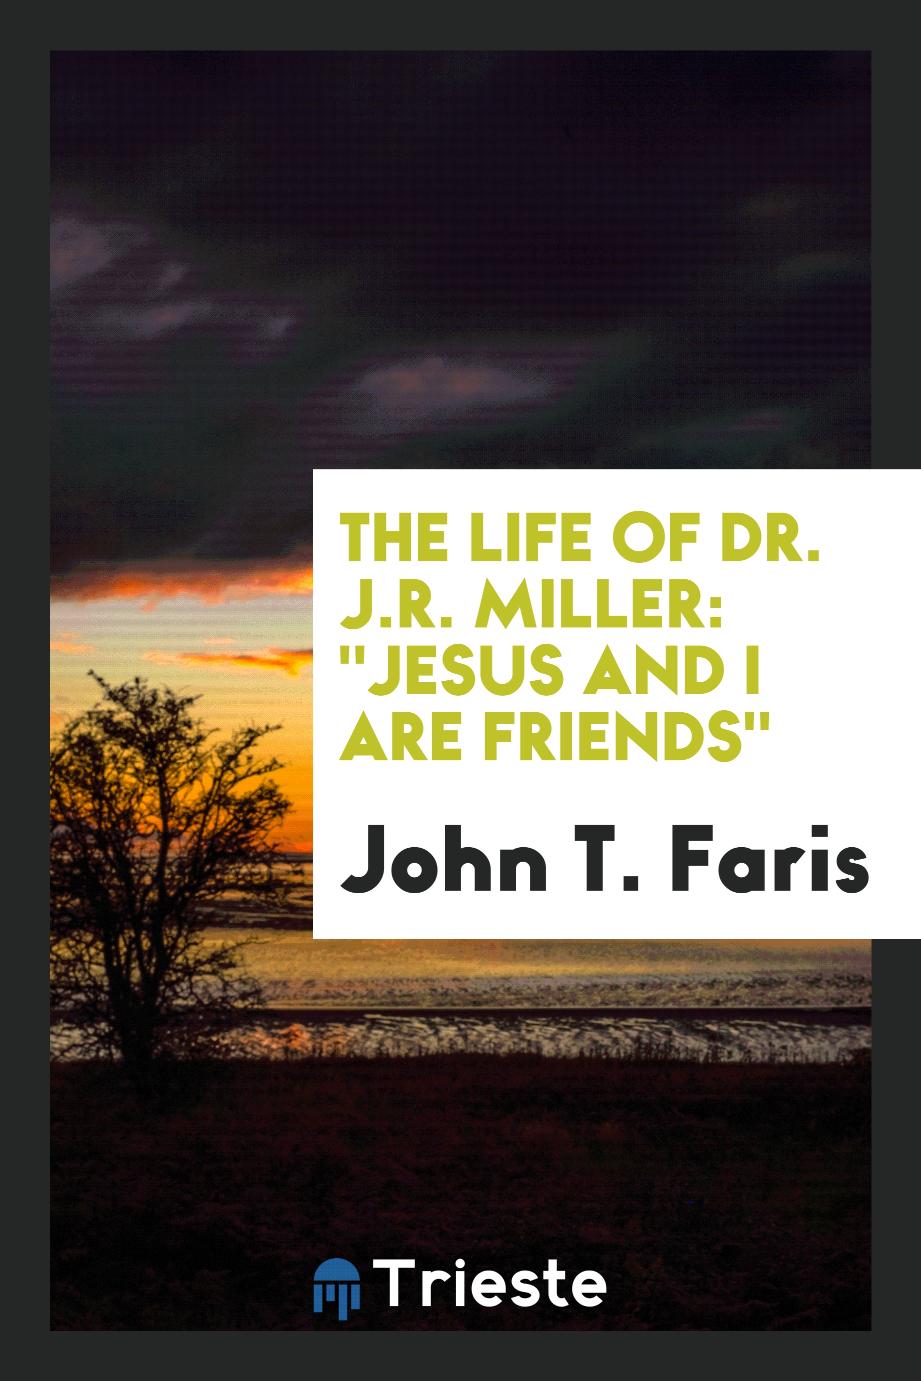 The life of Dr. J.R. Miller: "Jesus and I are friends"